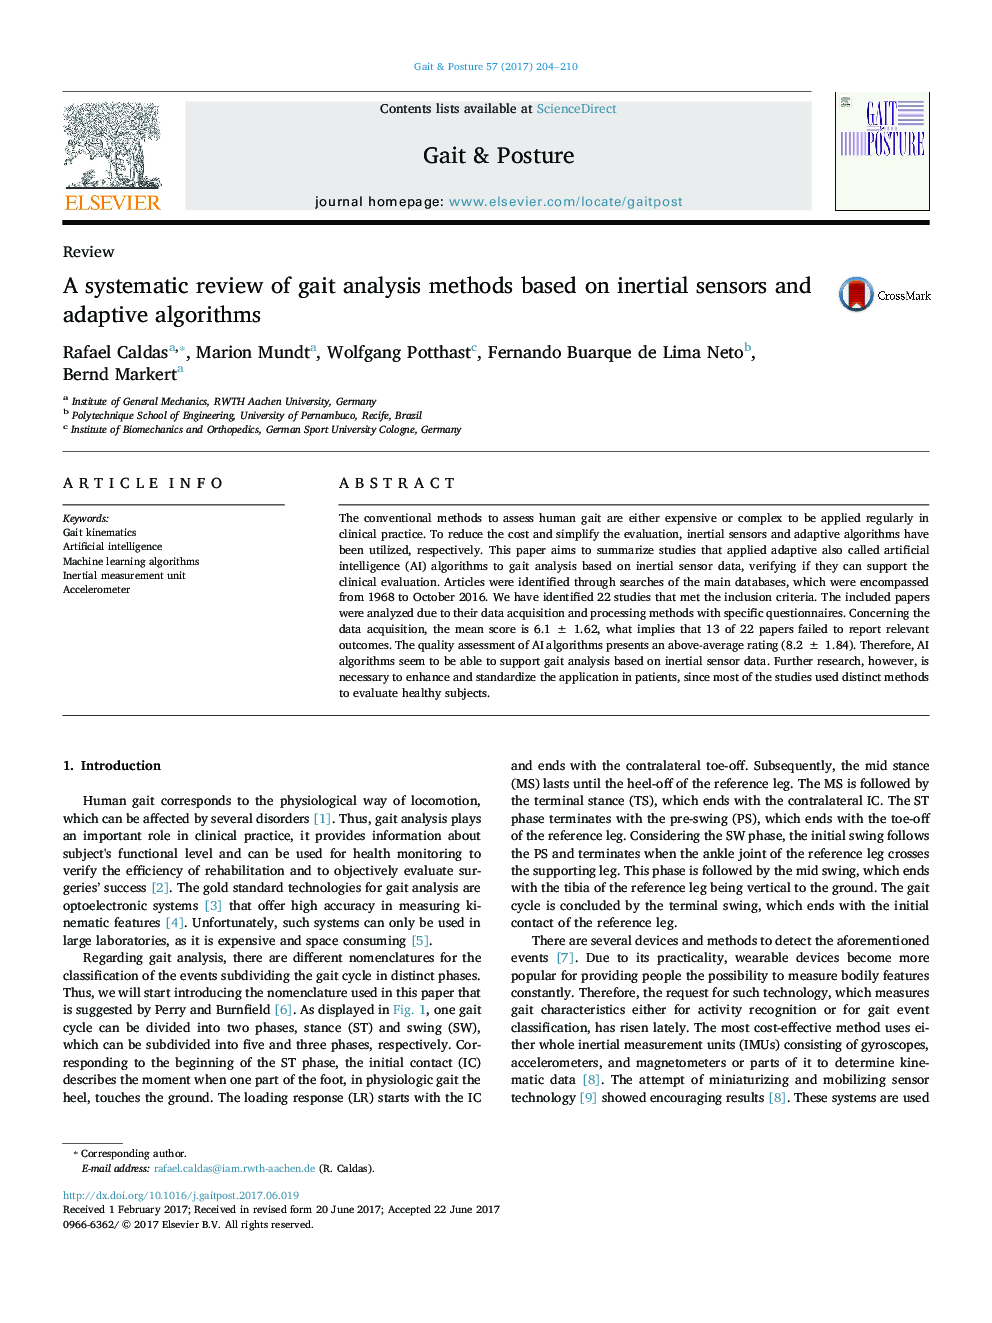 A systematic review of gait analysis methods based on inertial sensors and adaptive algorithms